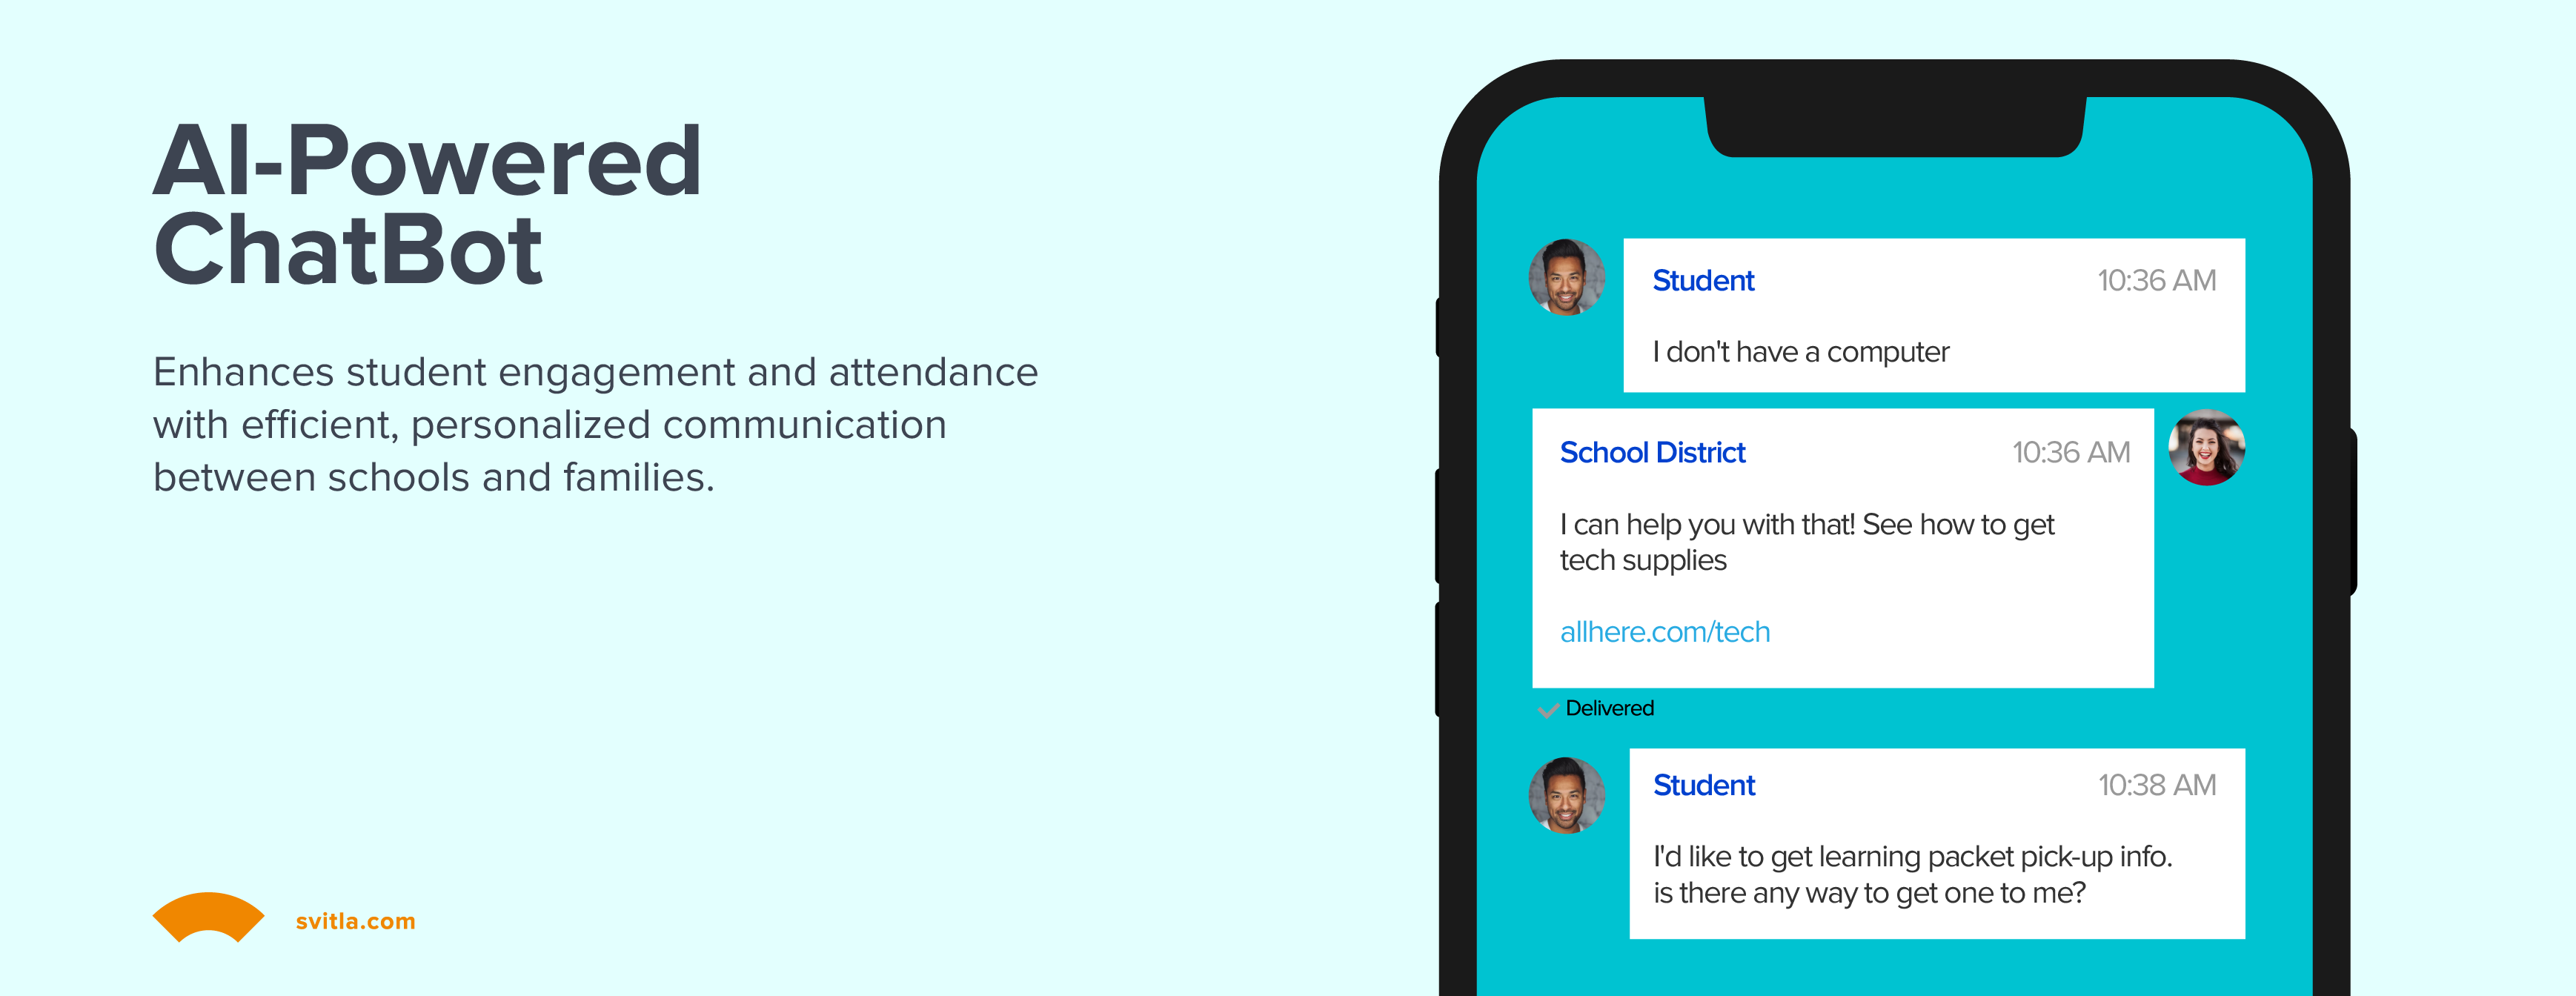 Chatbots in education